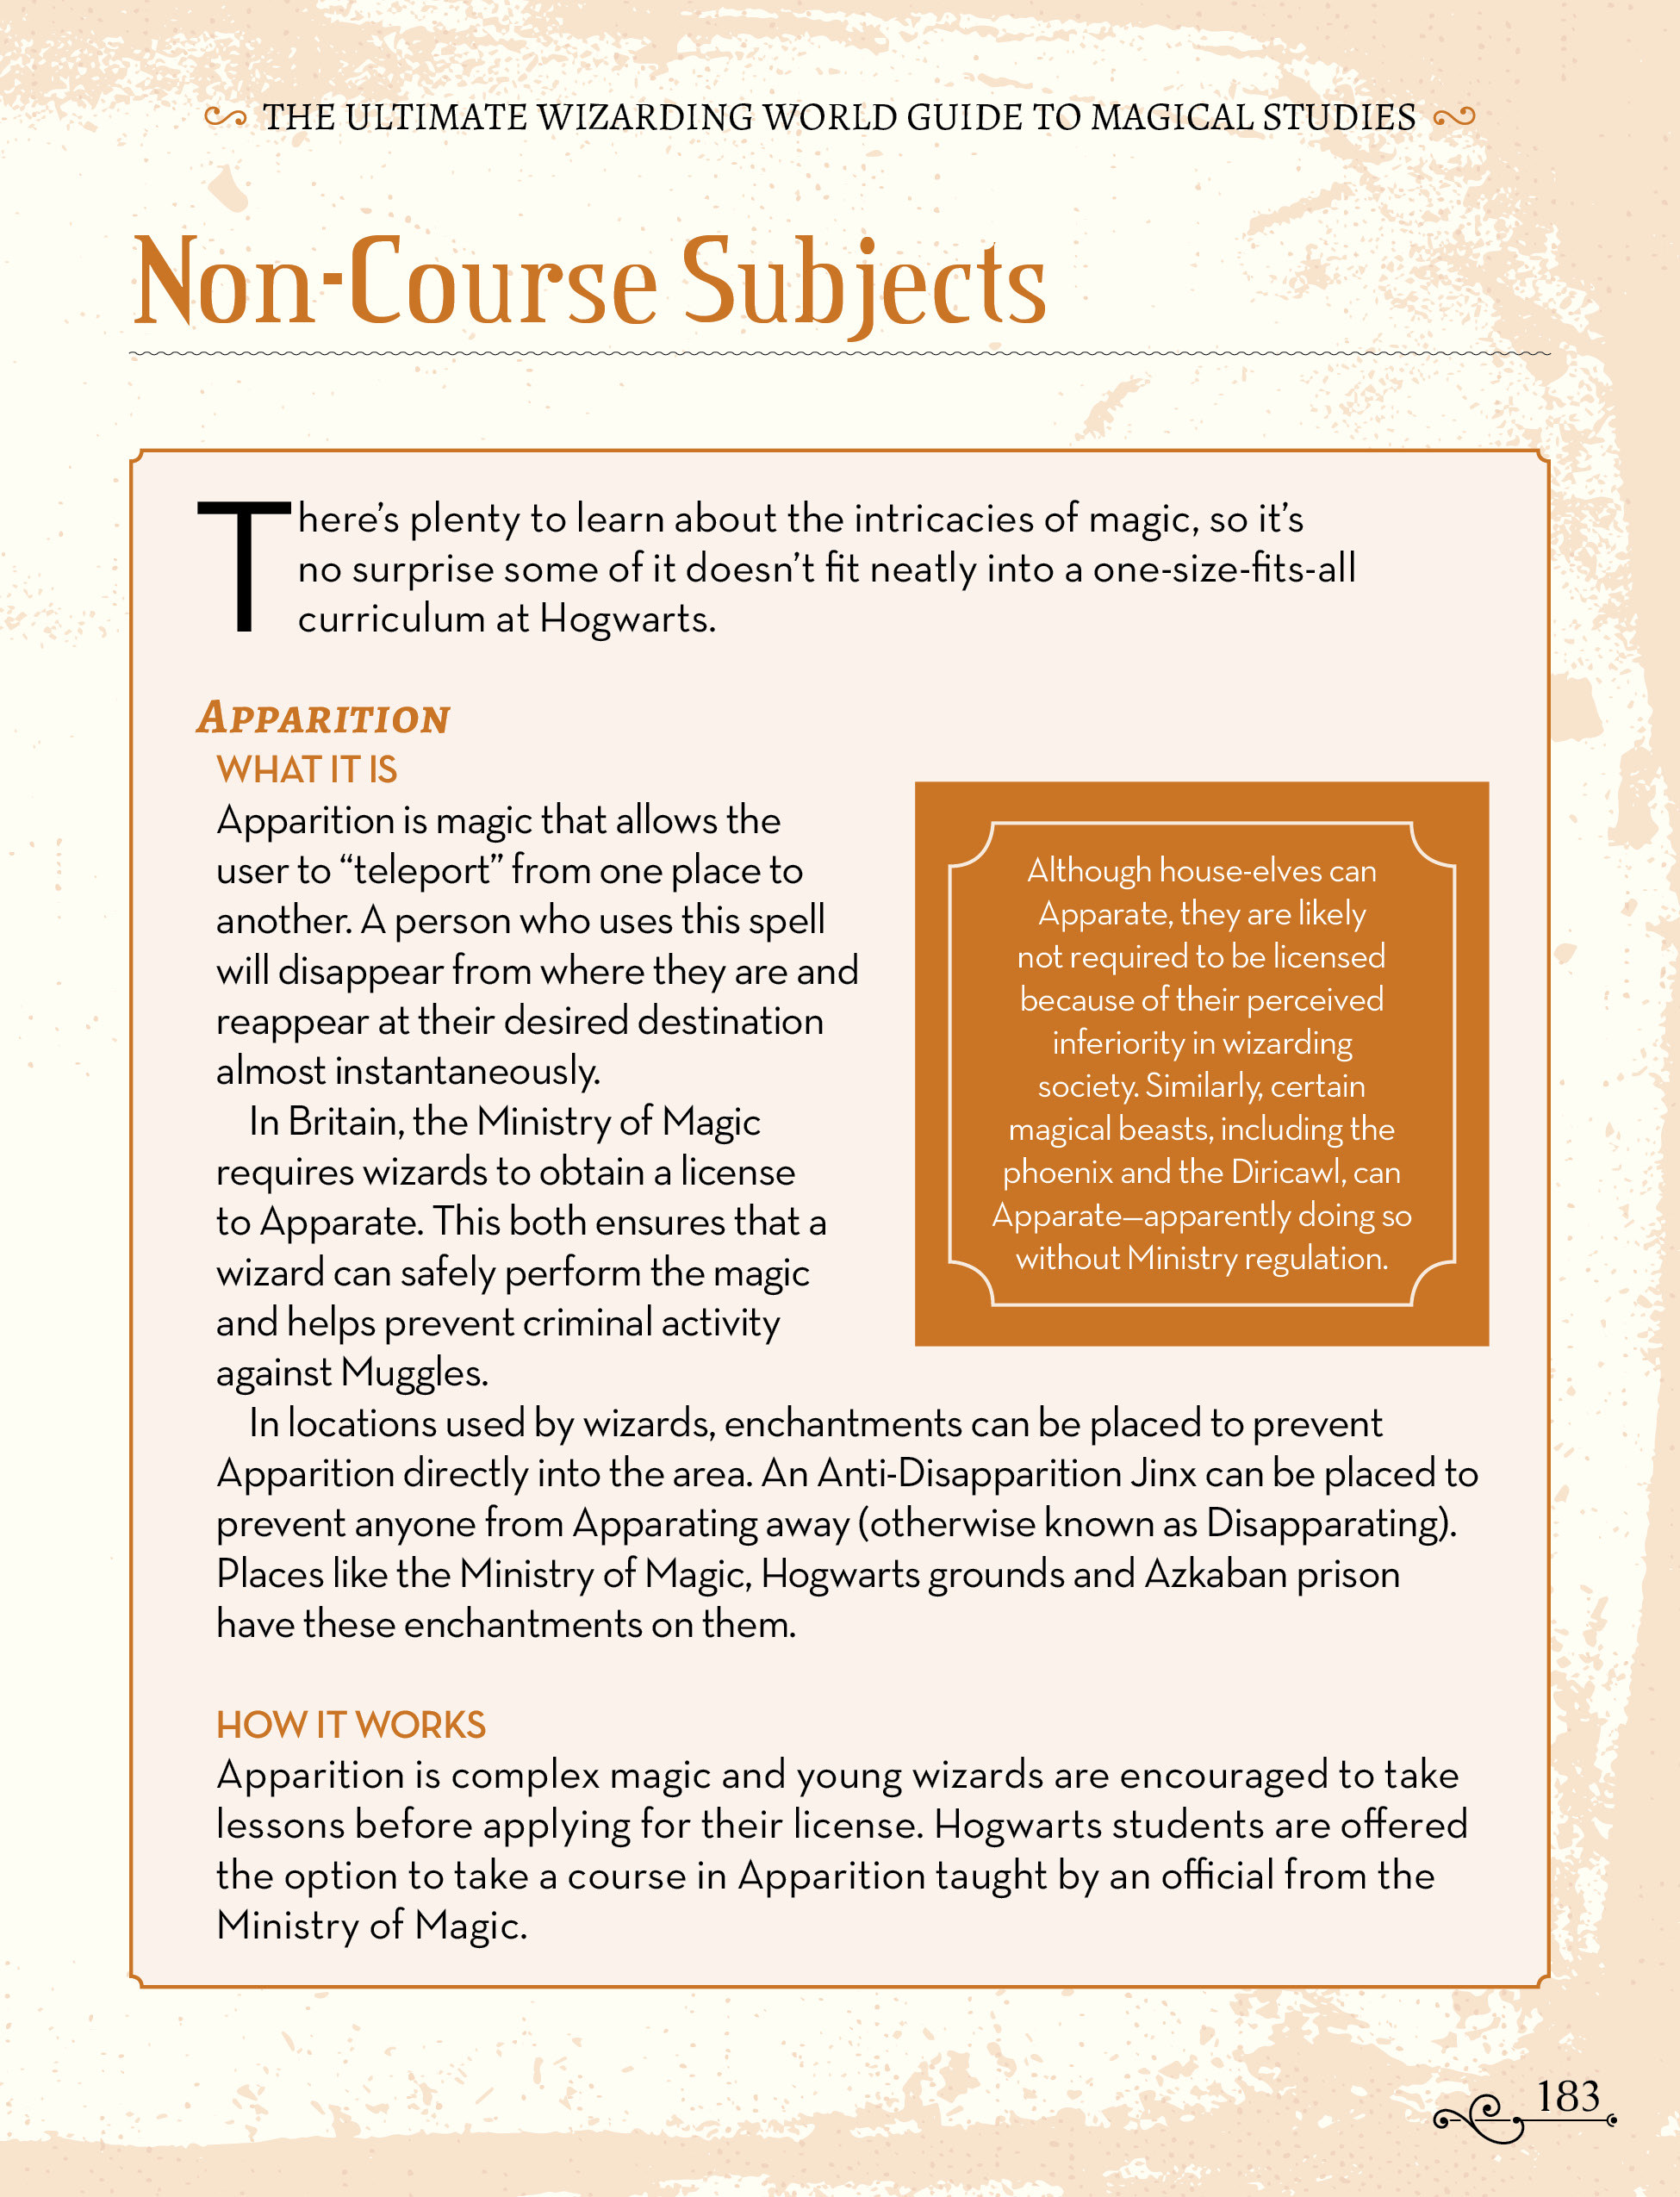 Non-course subjects page from “The Ultimate Wizarding World Guide to Magical Studies”